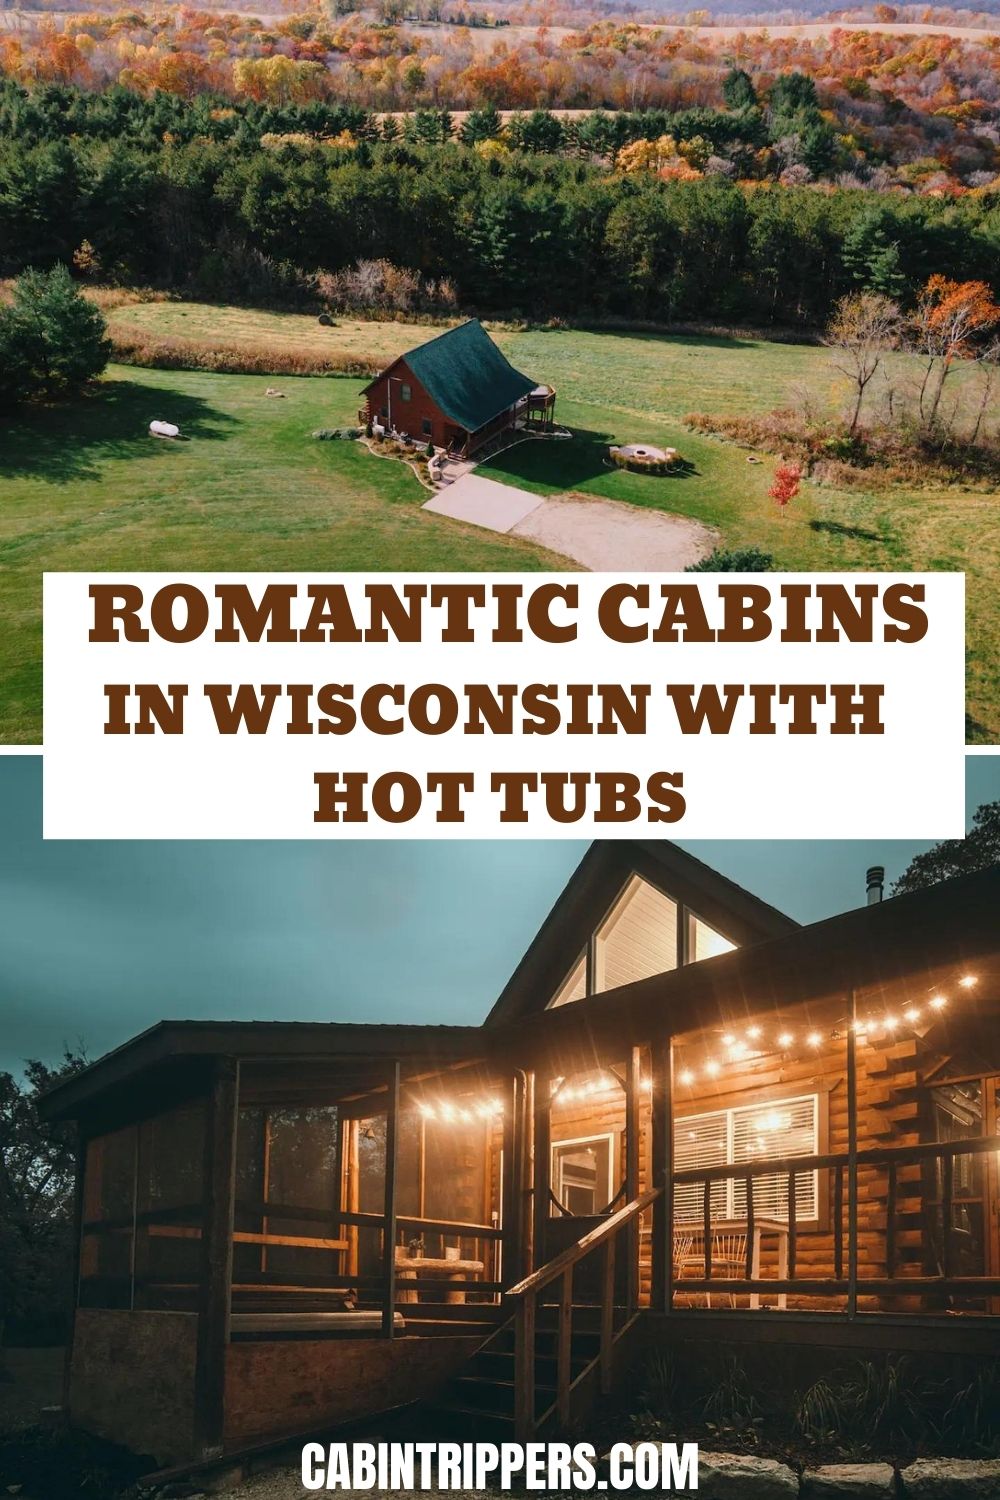 Romantic Cabins In Wisconsin with Hot Tubs